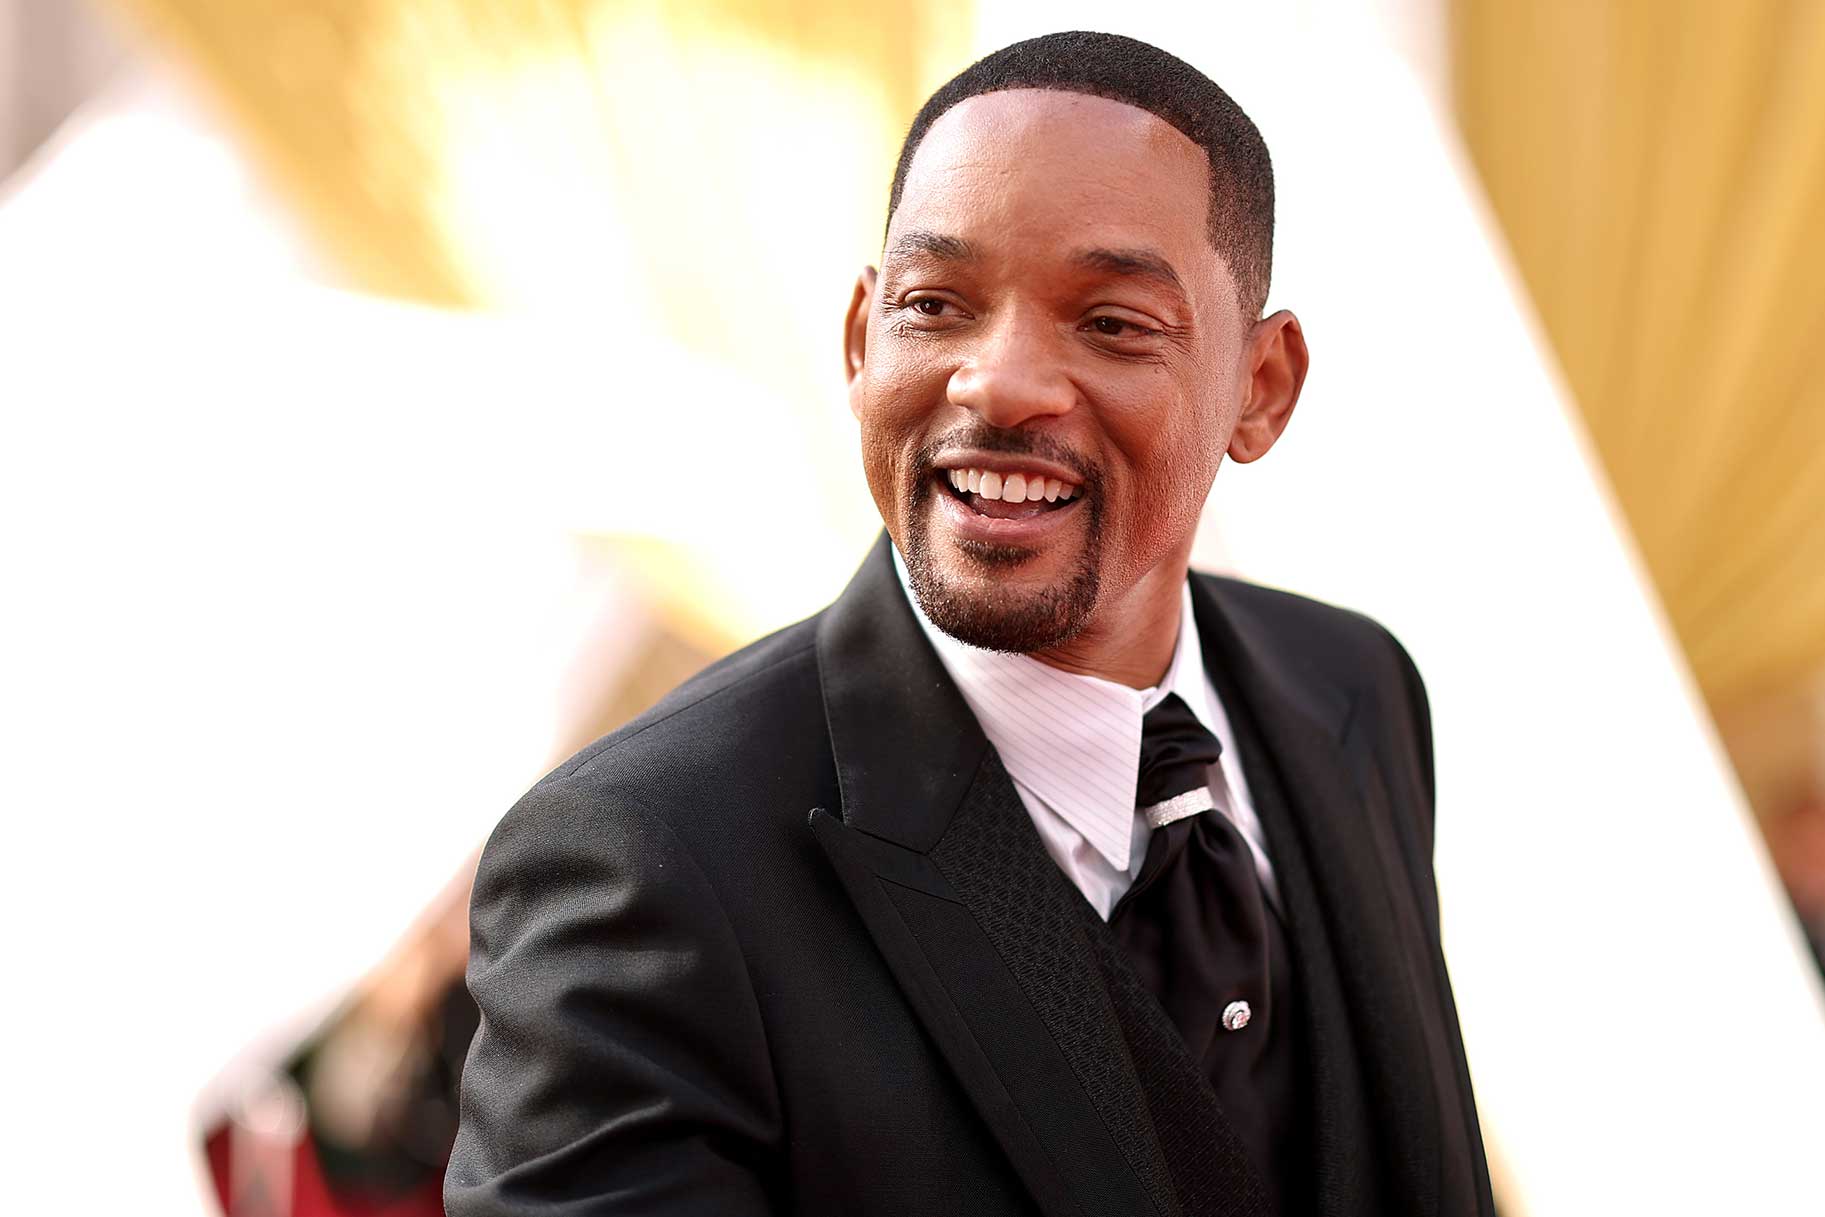 Will Smith smiling on a red carpet